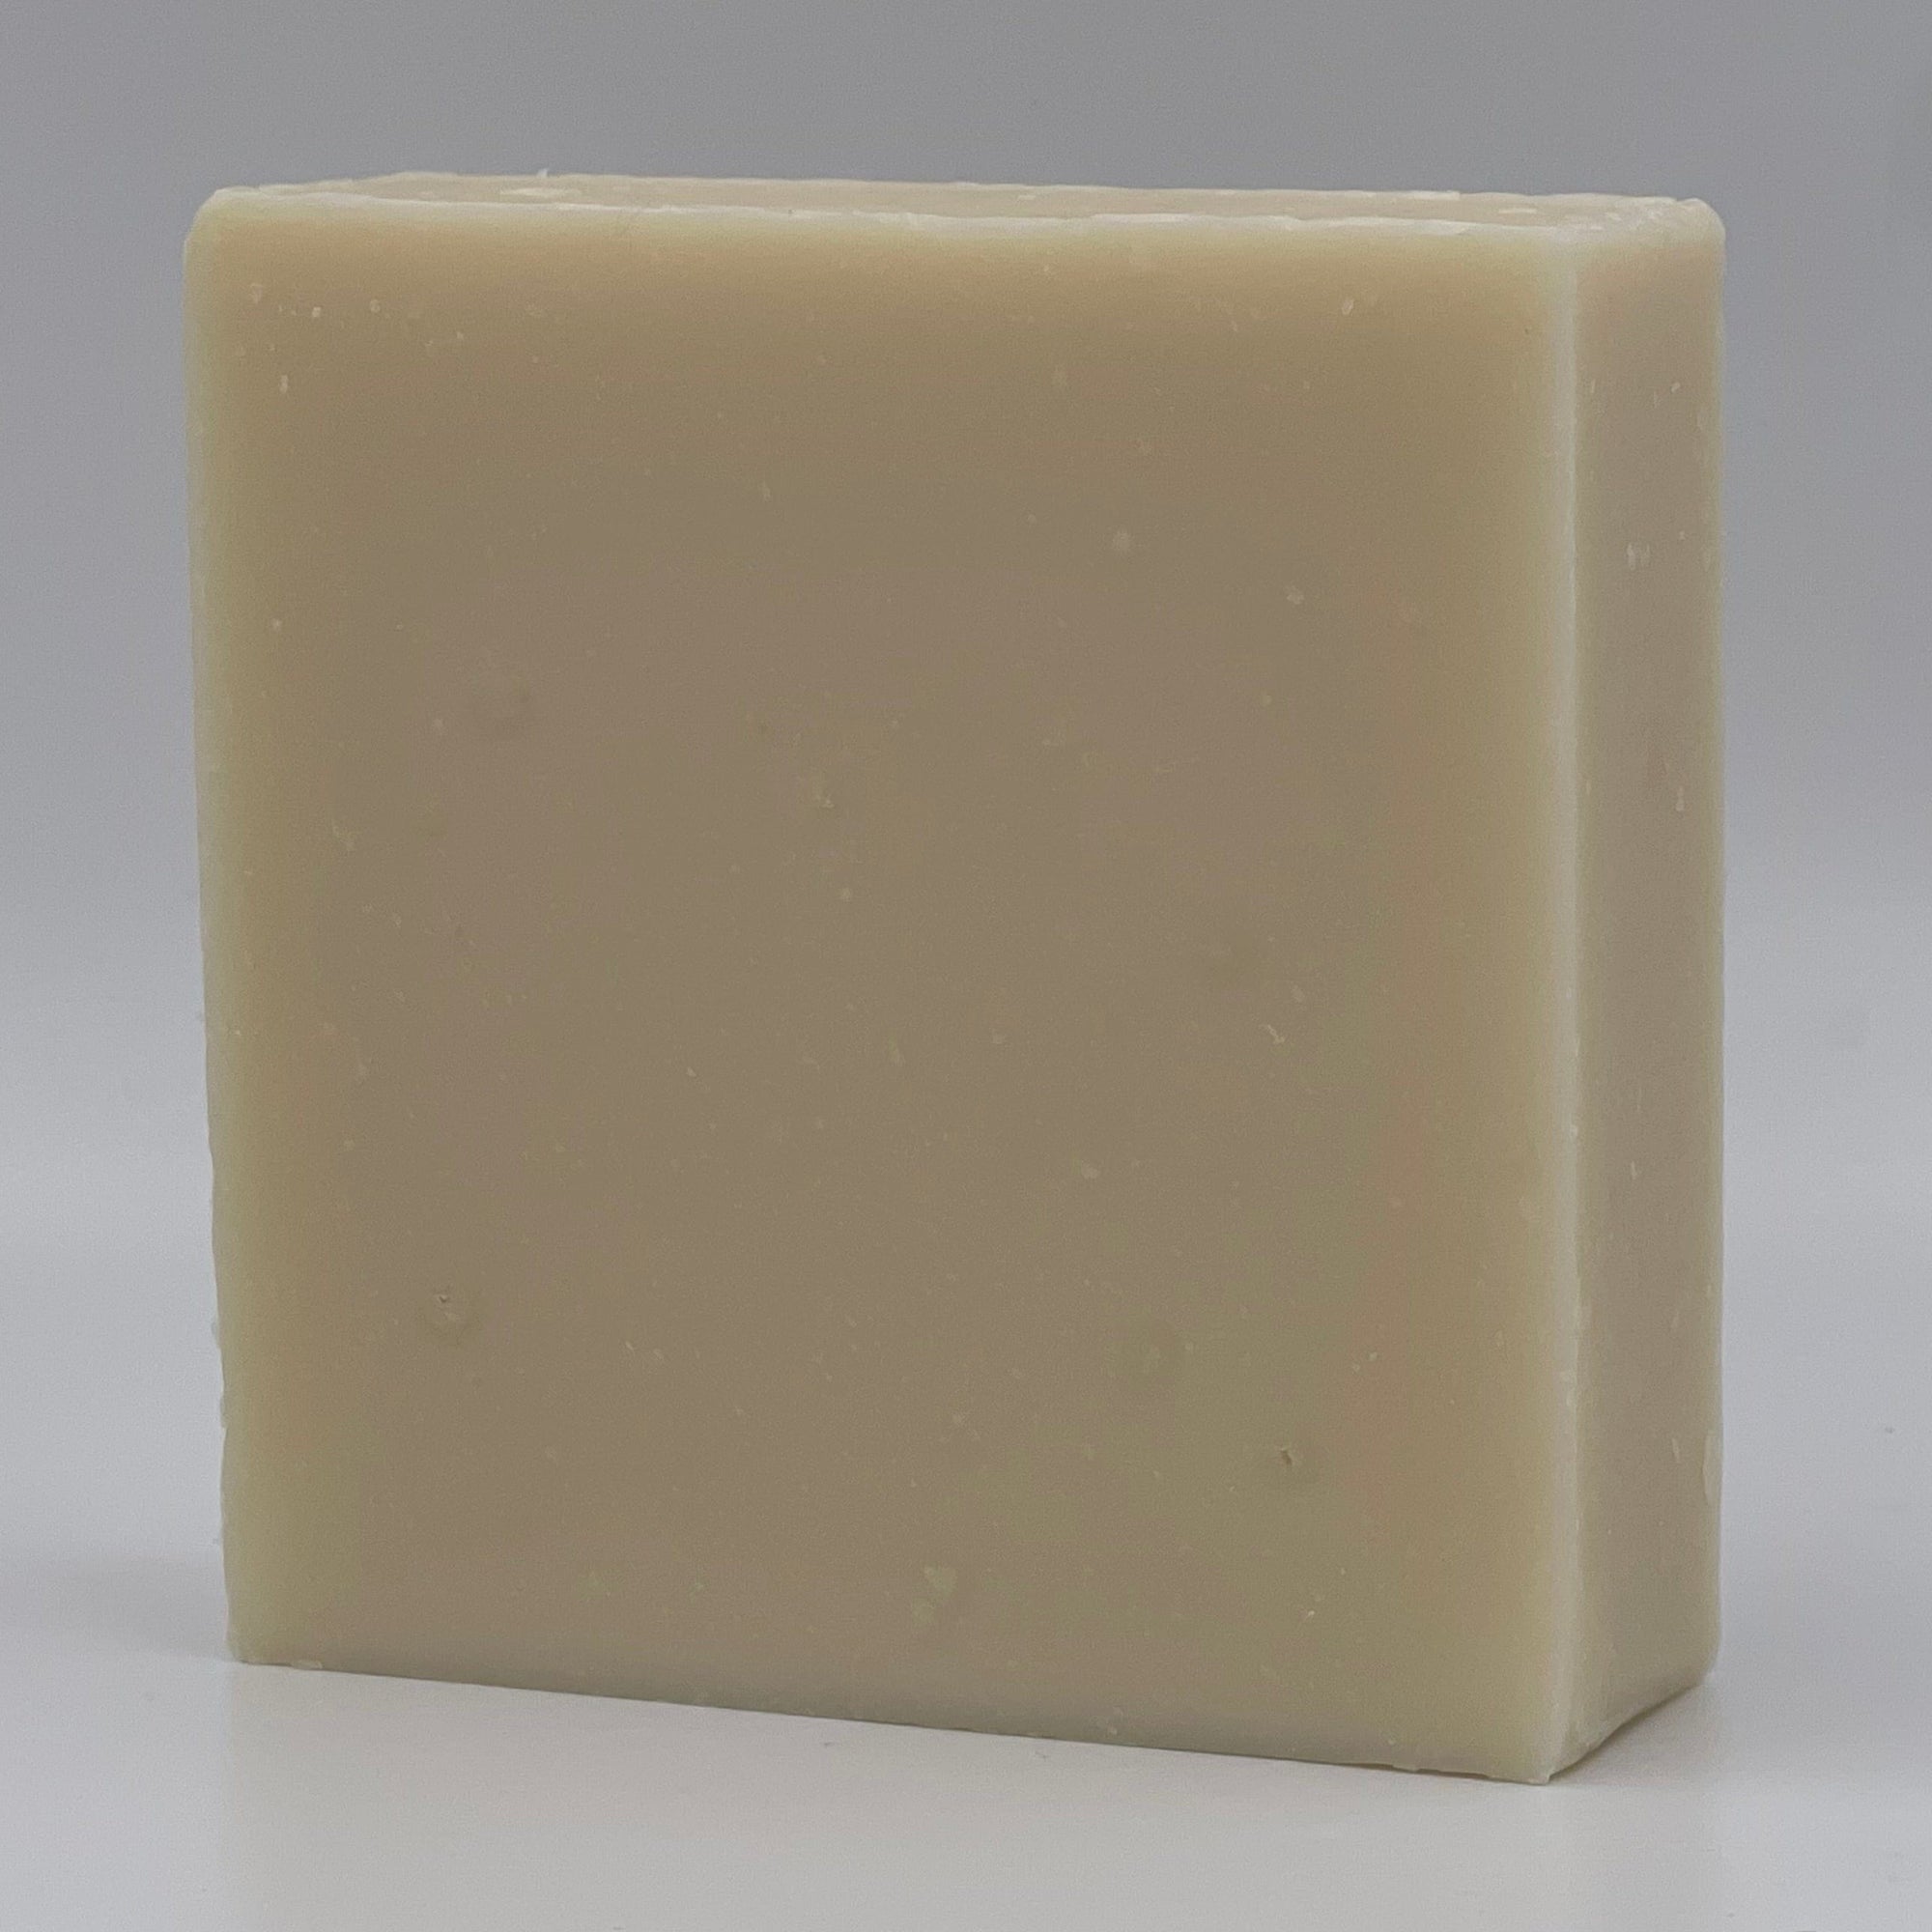 Pearberry Soap